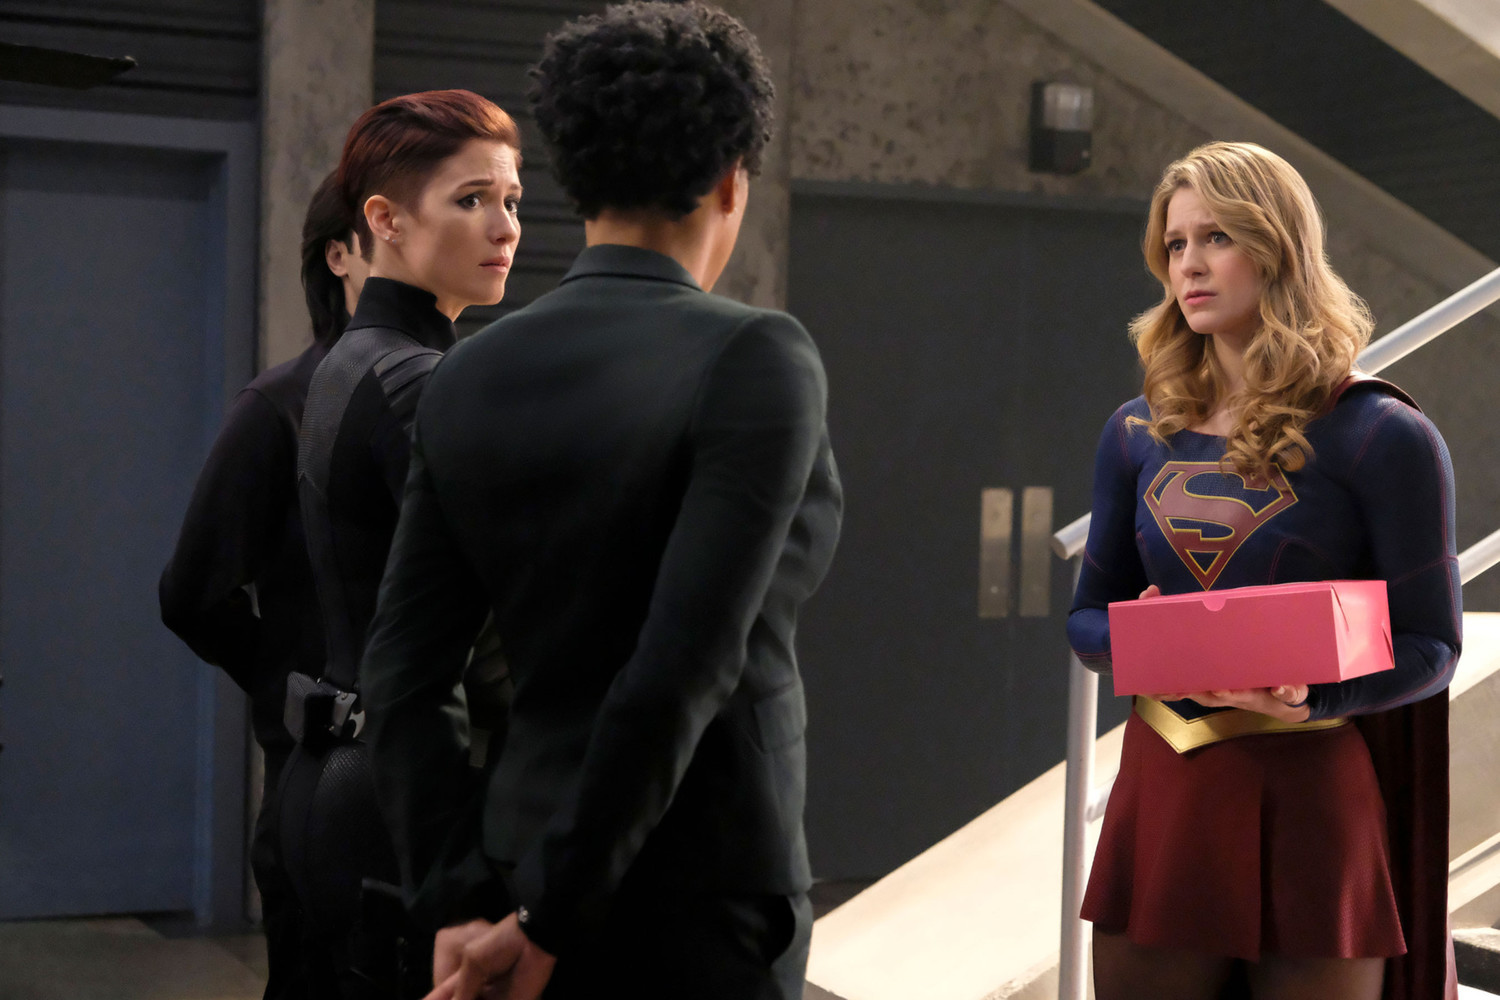 BWW Recap: SUPERGIRL's Reputation is Demolished in 'All About Eve' 